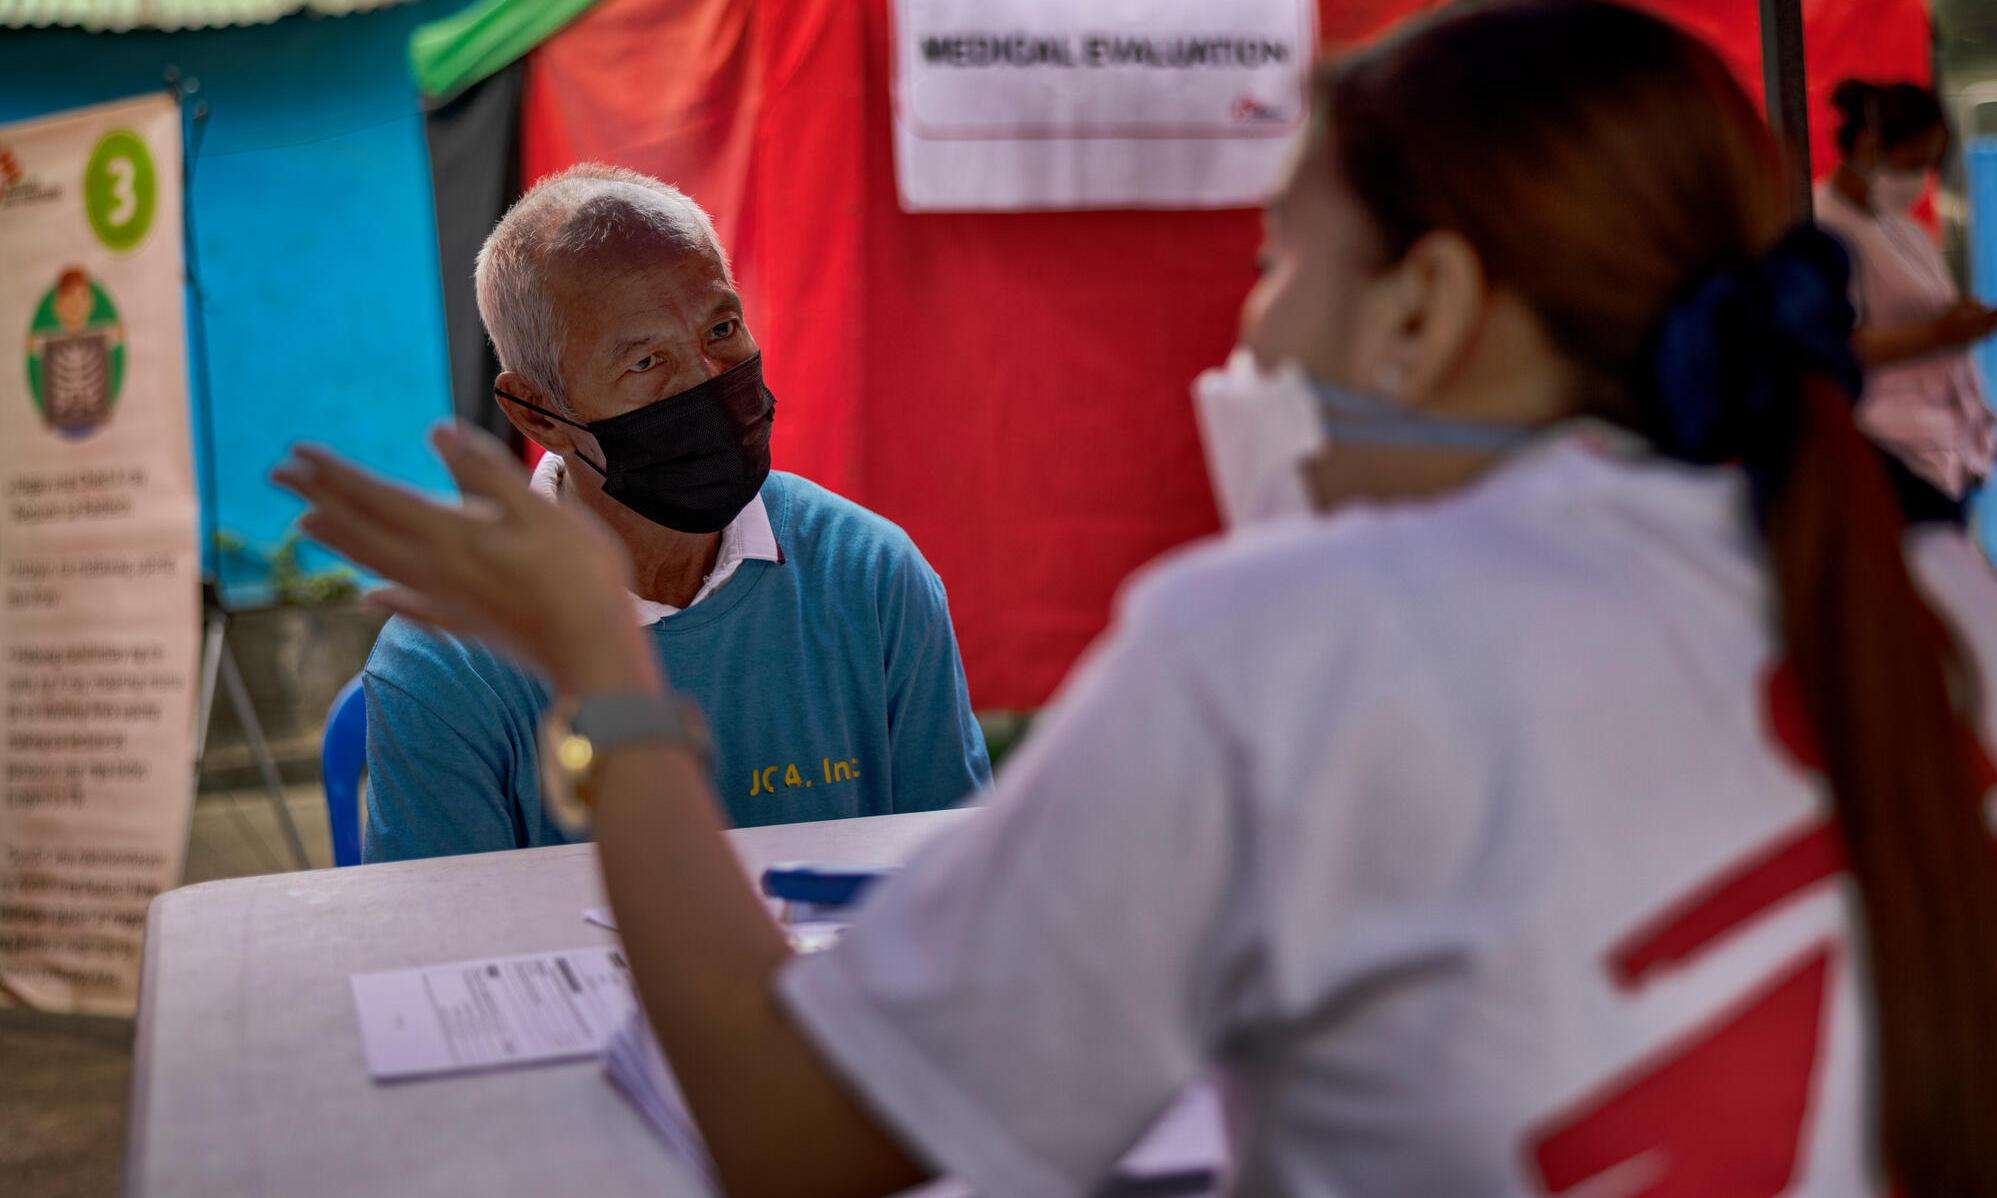 A patient sits at a table in front of an MSF staff member for a free X-ray at an MSF tuberculosis (TB) screening sites in Manila.